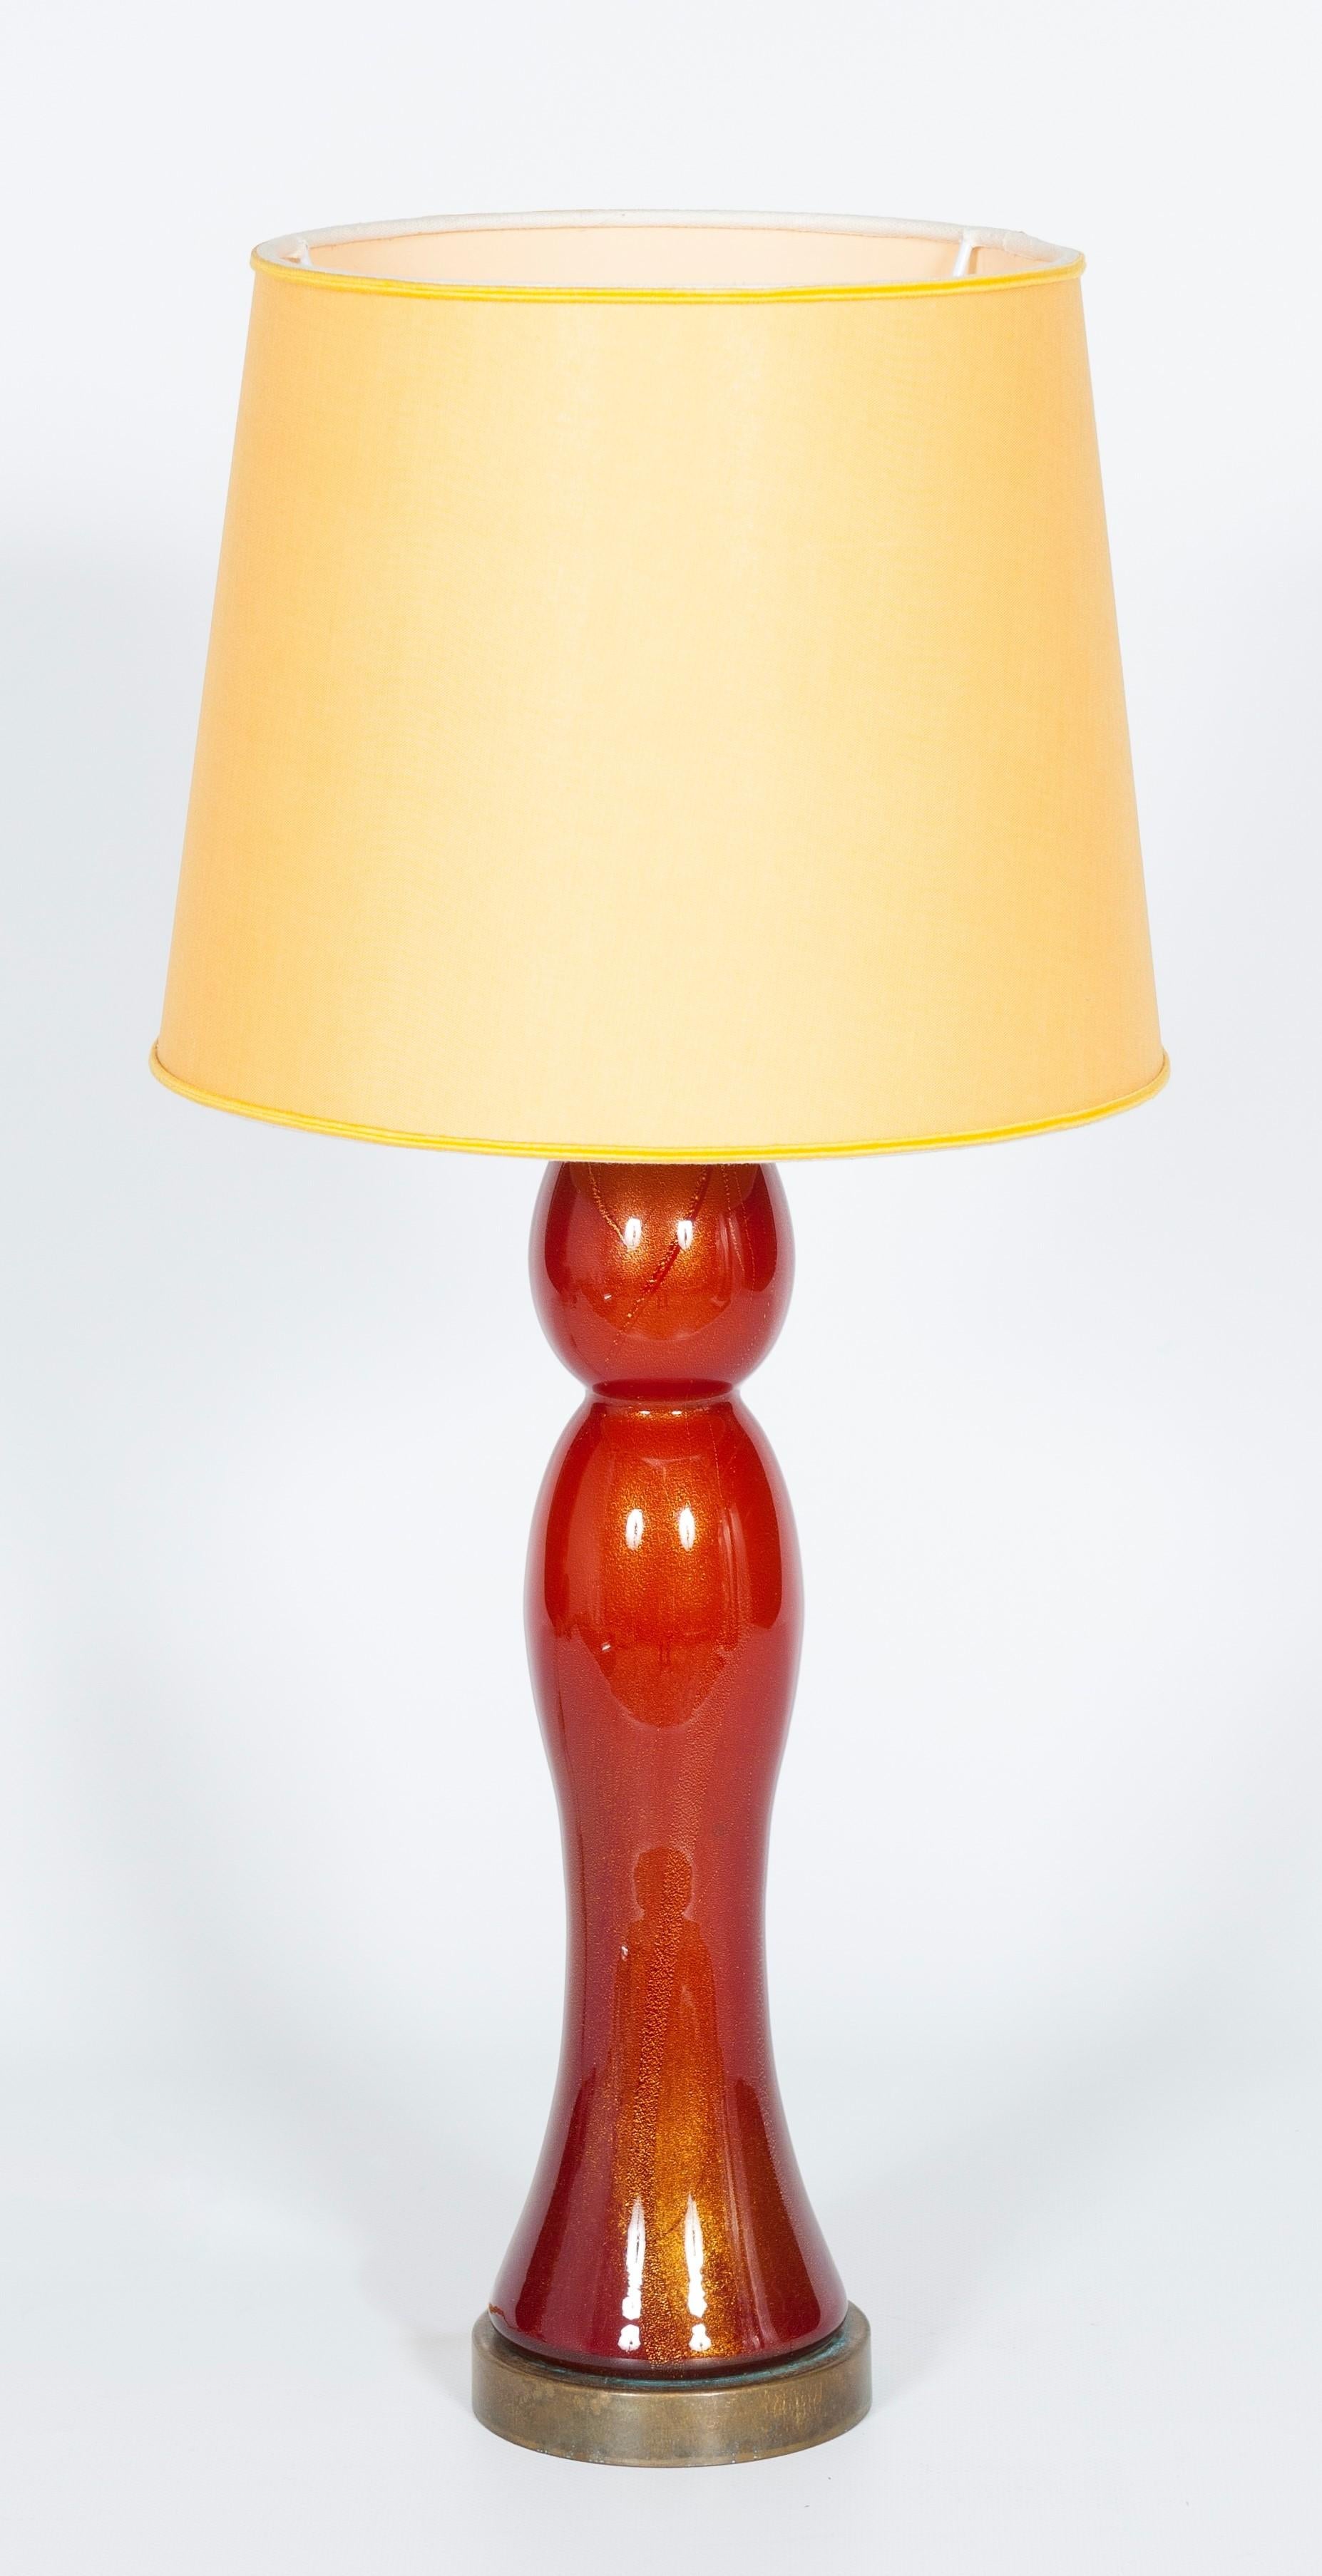 Italian Pair of Murano Glass Table Lamps Coral and Gold Leaf Color, 1980s For Sale